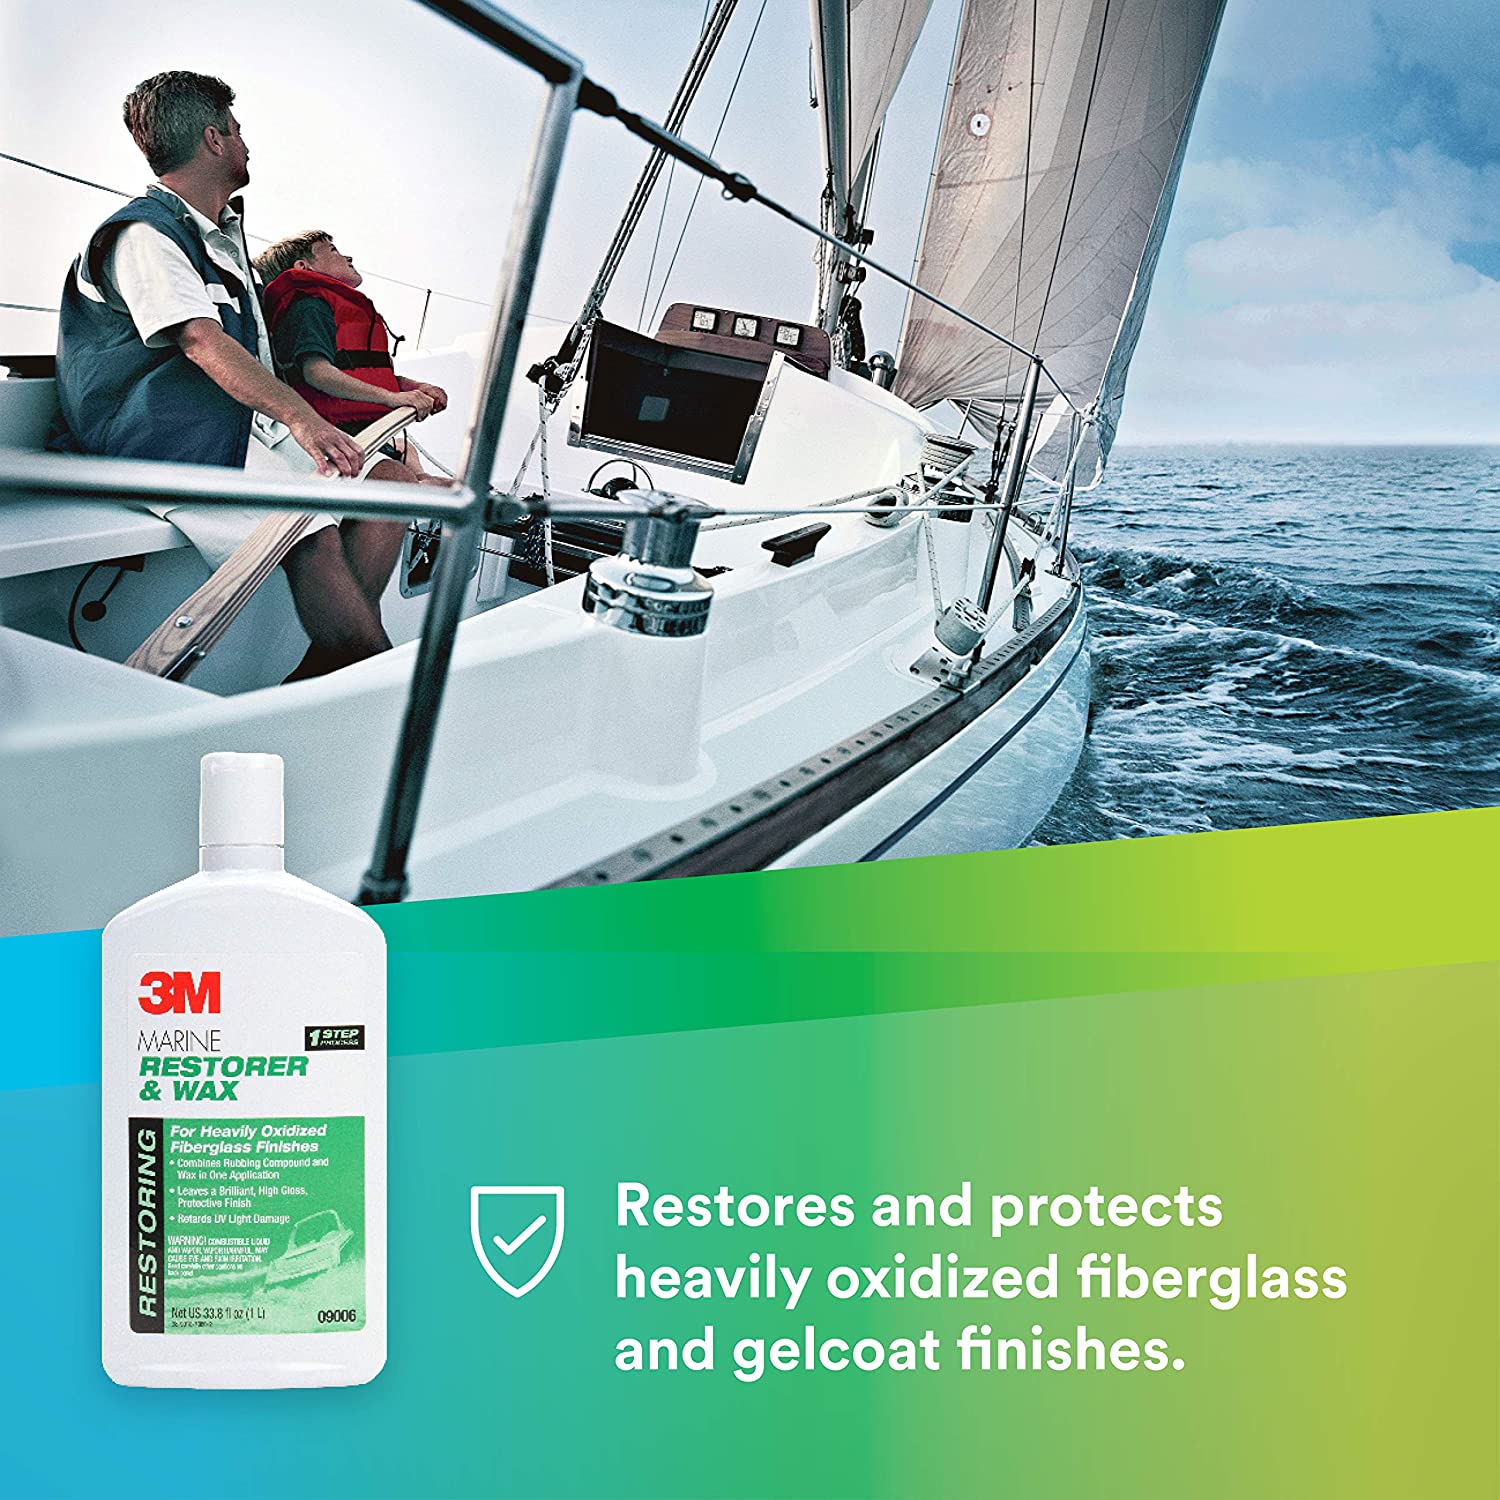 3M Perfect-It Boat Wax, 36113, 1 Quart, Contains Carnauba Wax, Protects  against Weather and Oxidation, For Boats and RVs 